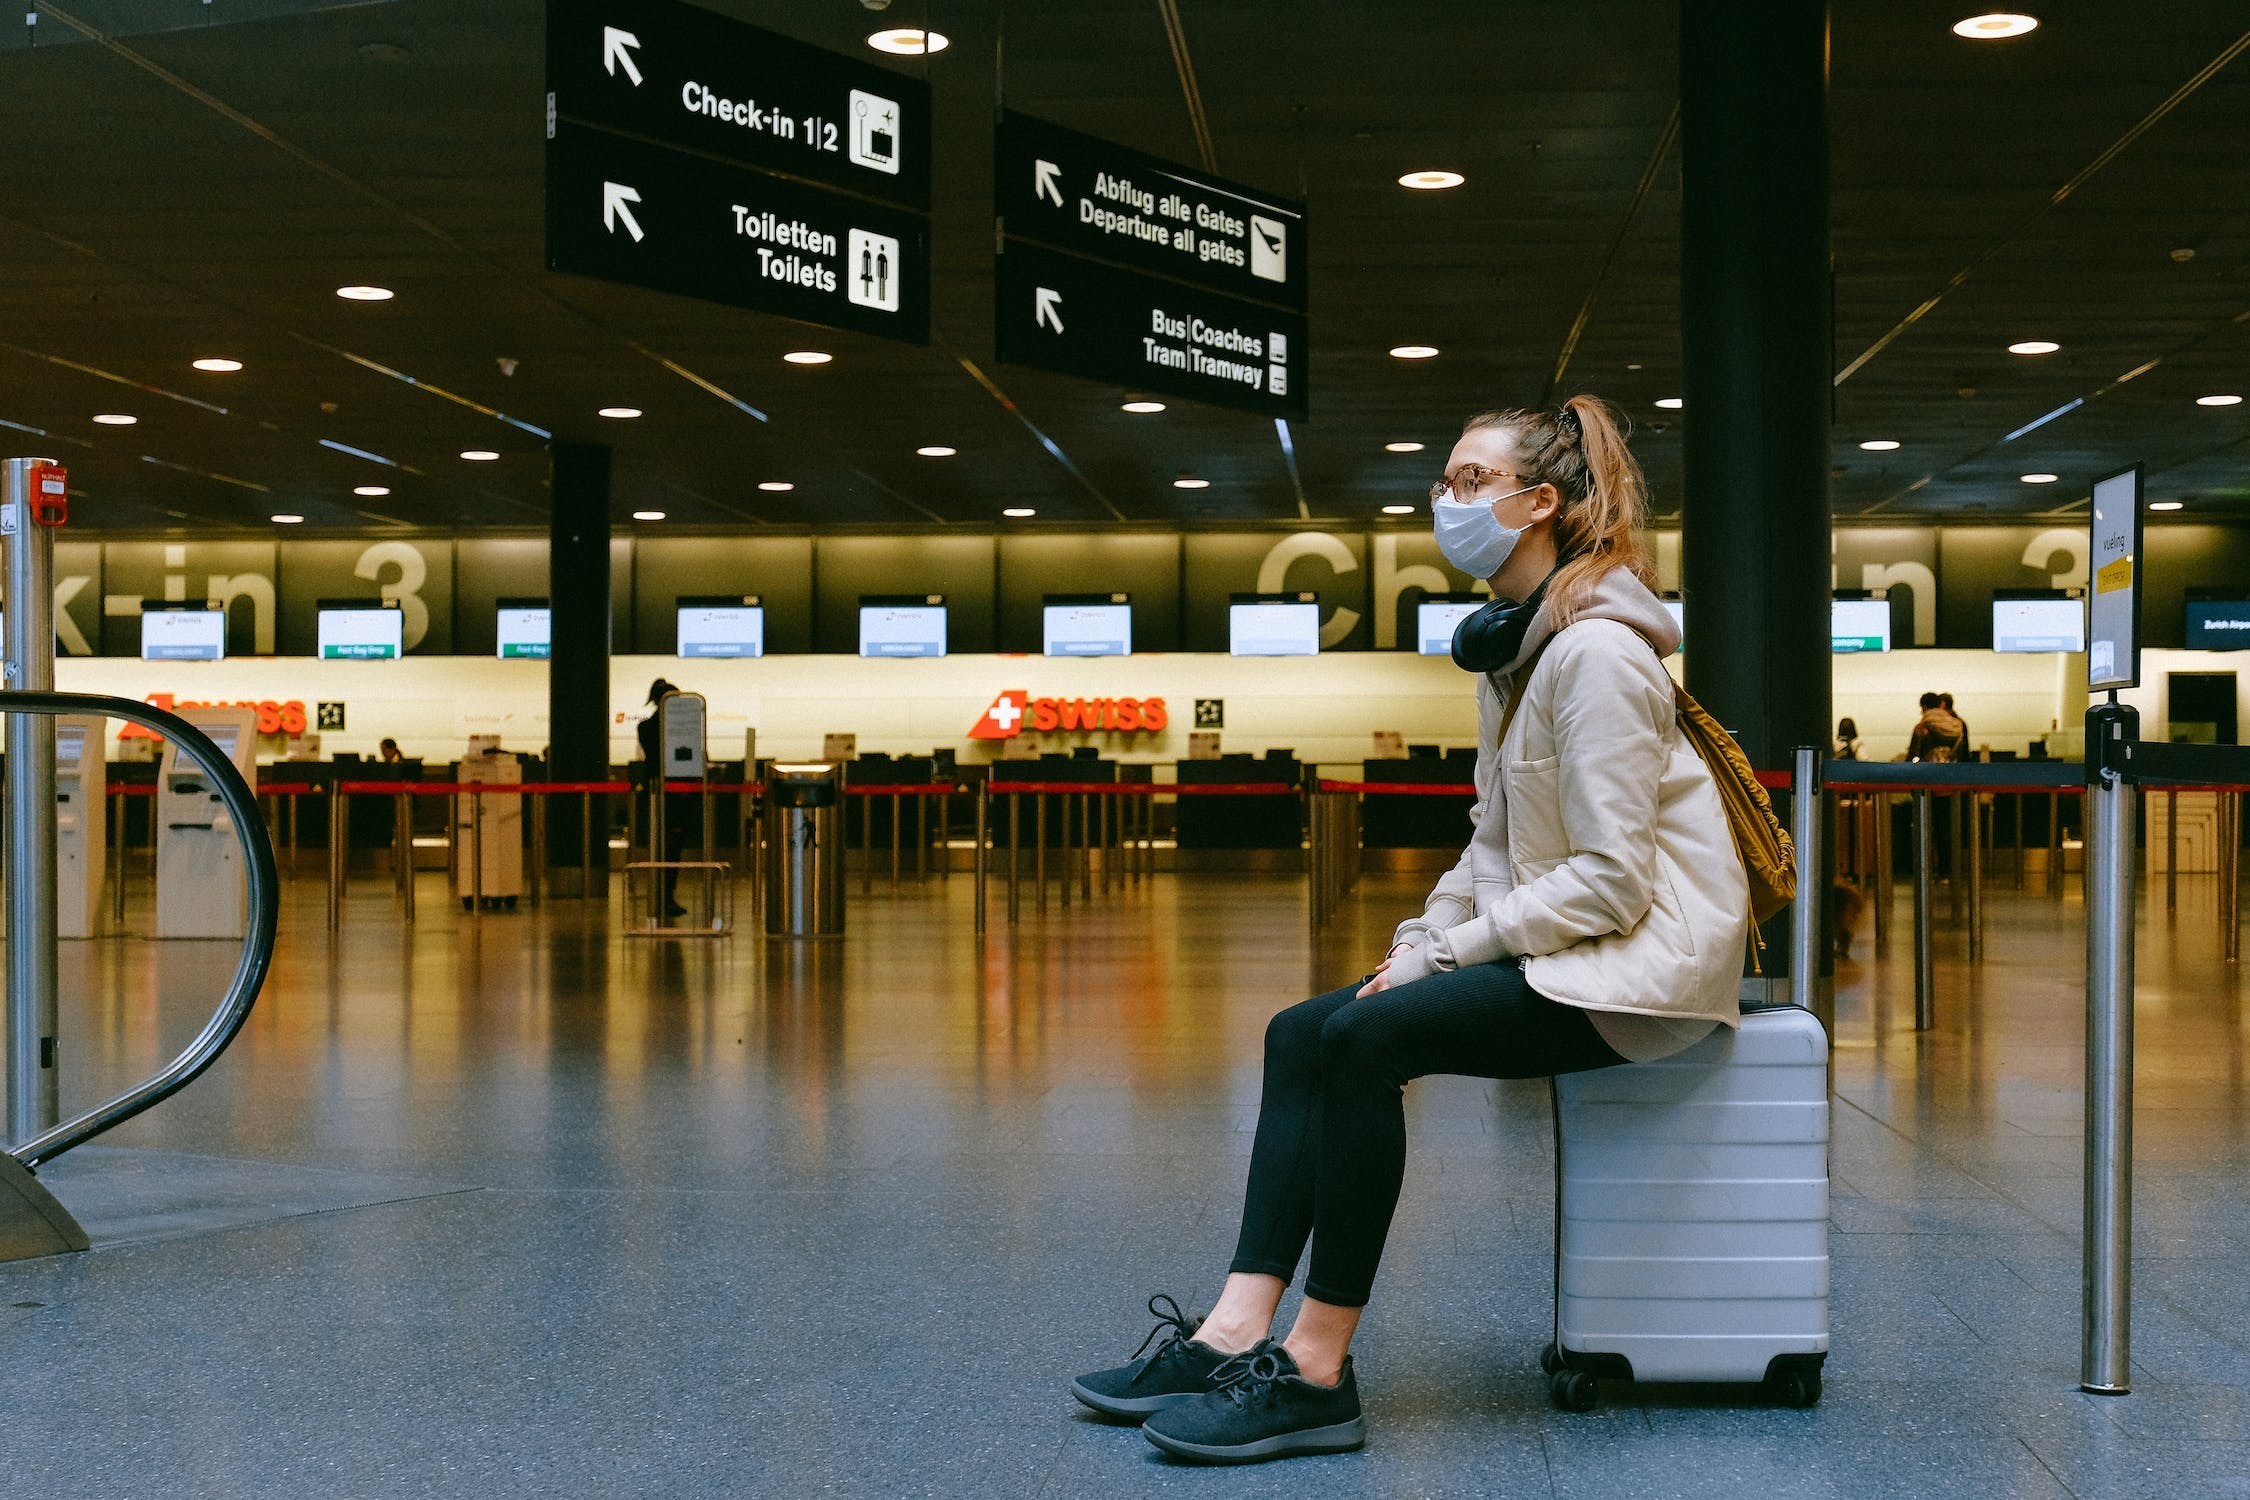 An air travel passenger sits alone in an airport terminal waiting for a flight.